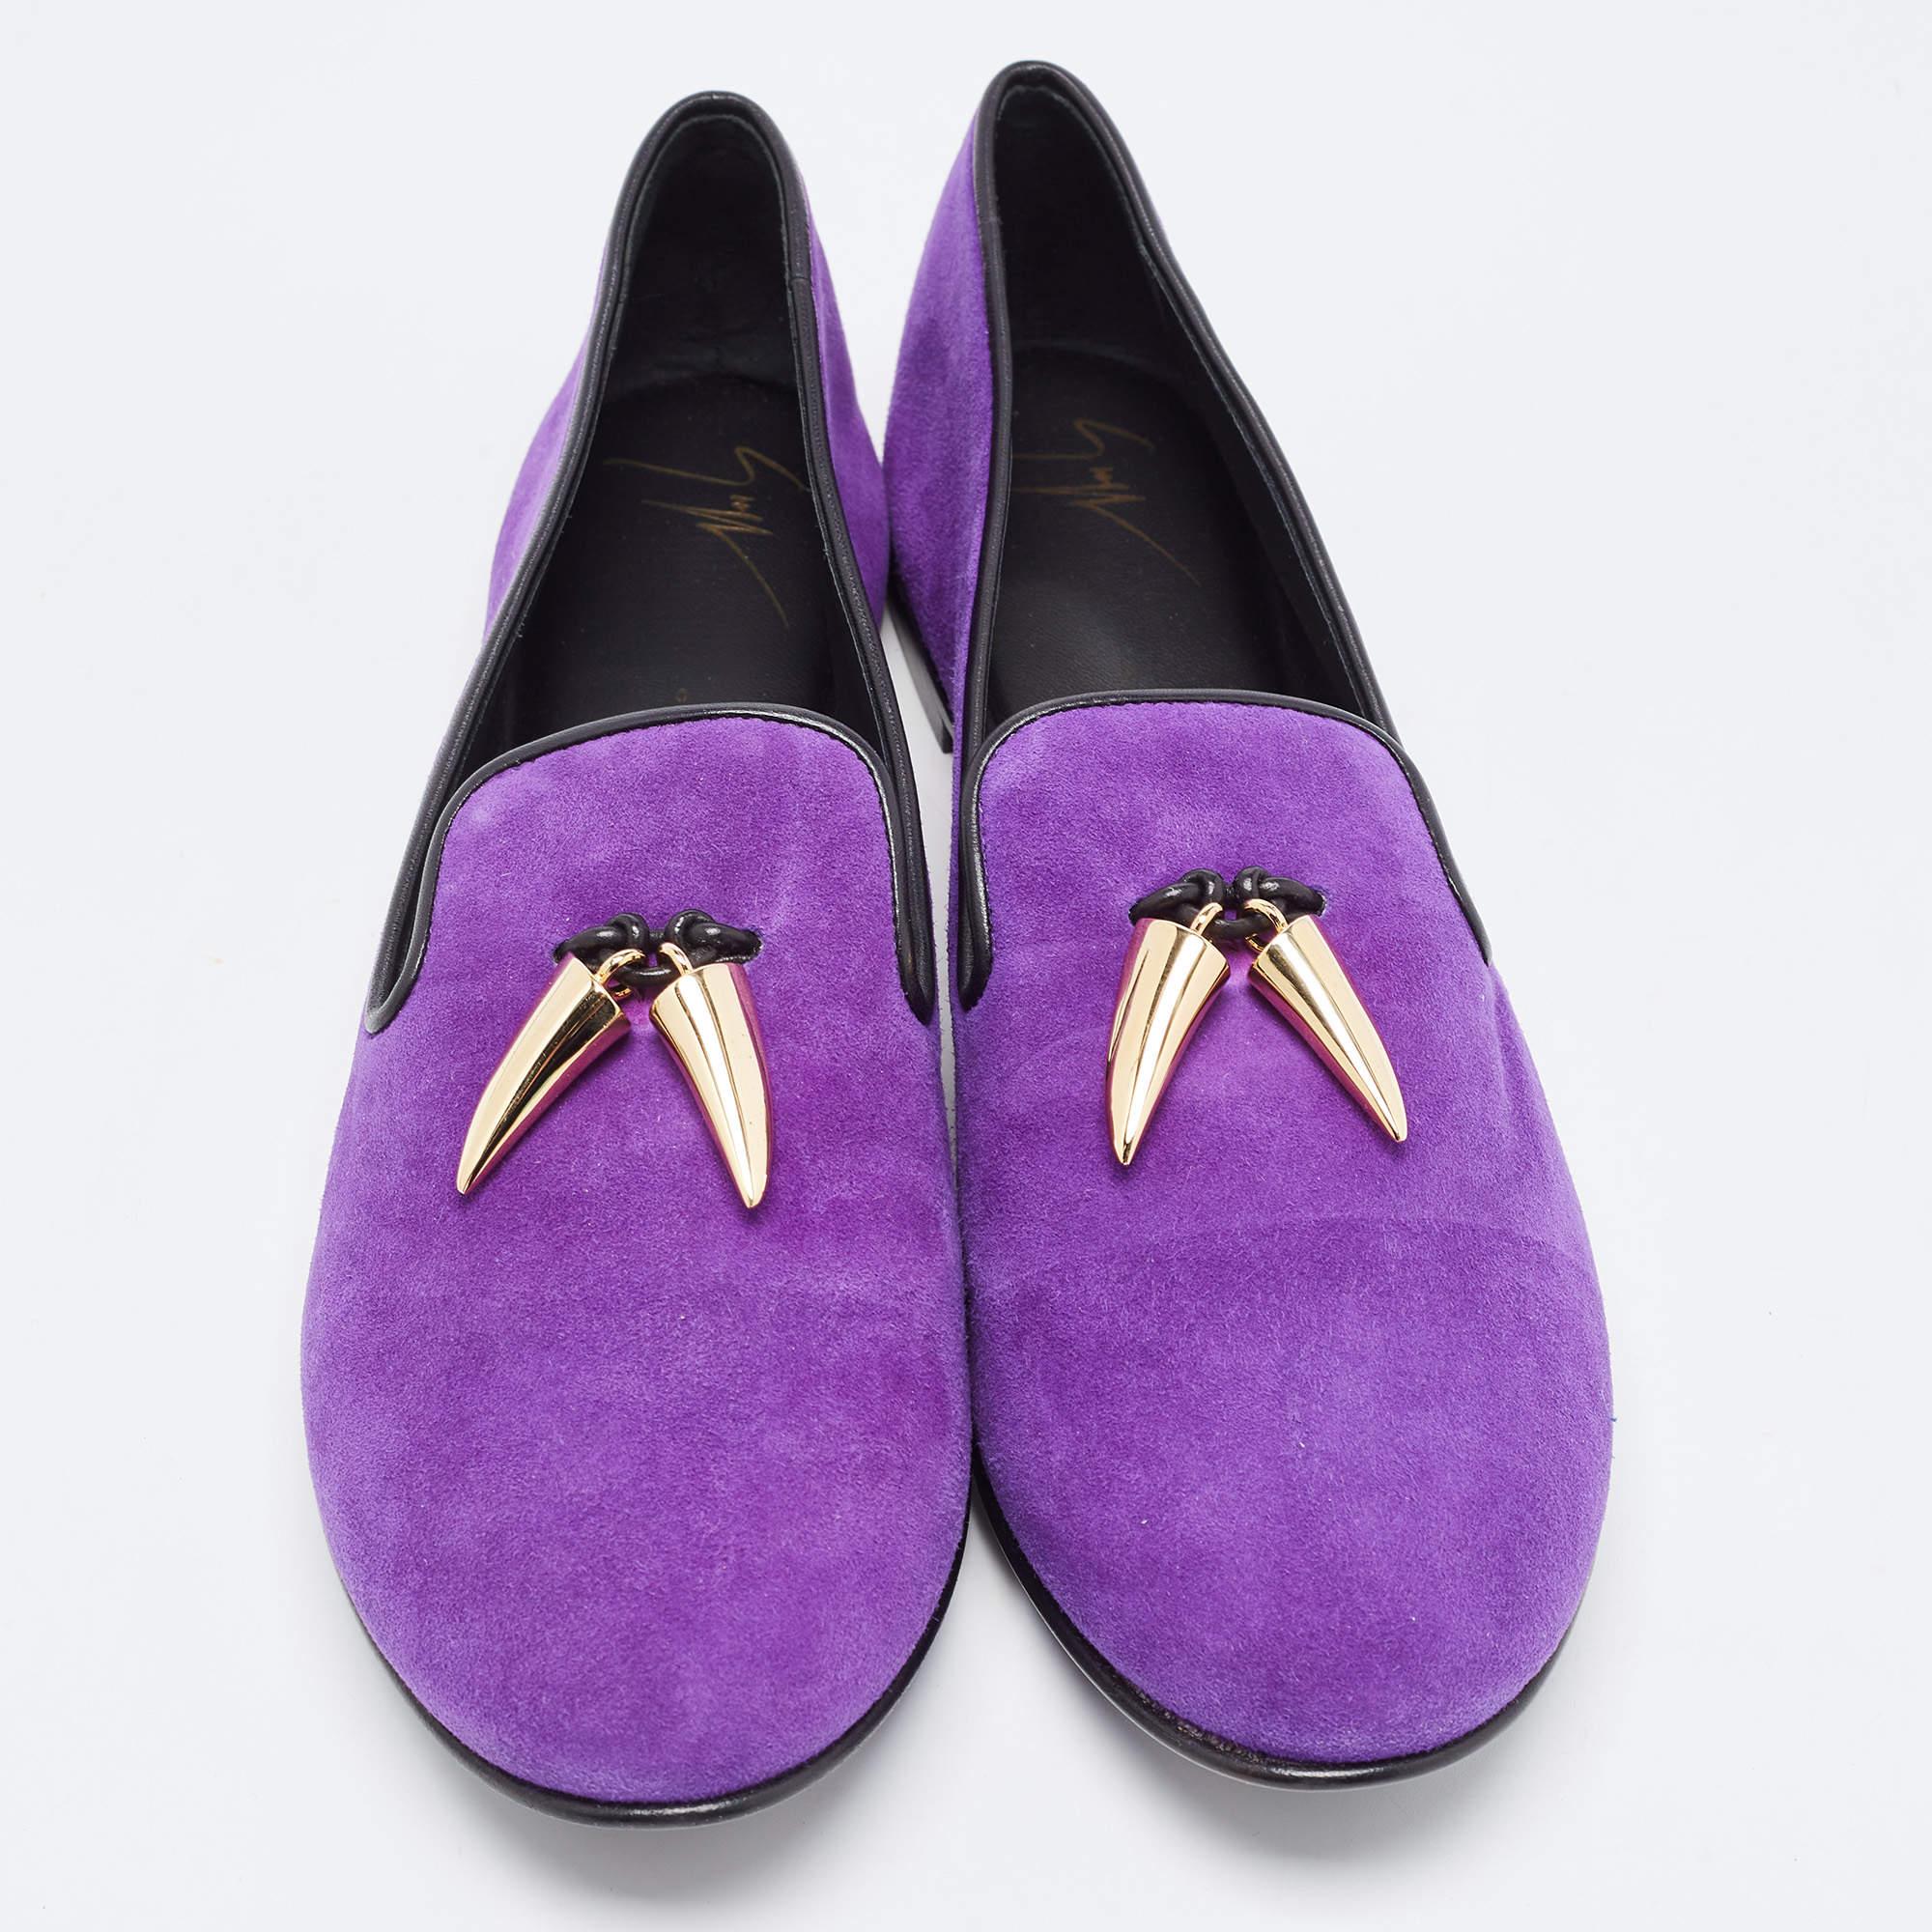 Giuseppe Zanotti Purple Suede Kevin Shark Tooth Tassel Smoking Slippers Size 41 In New Condition For Sale In Dubai, Al Qouz 2